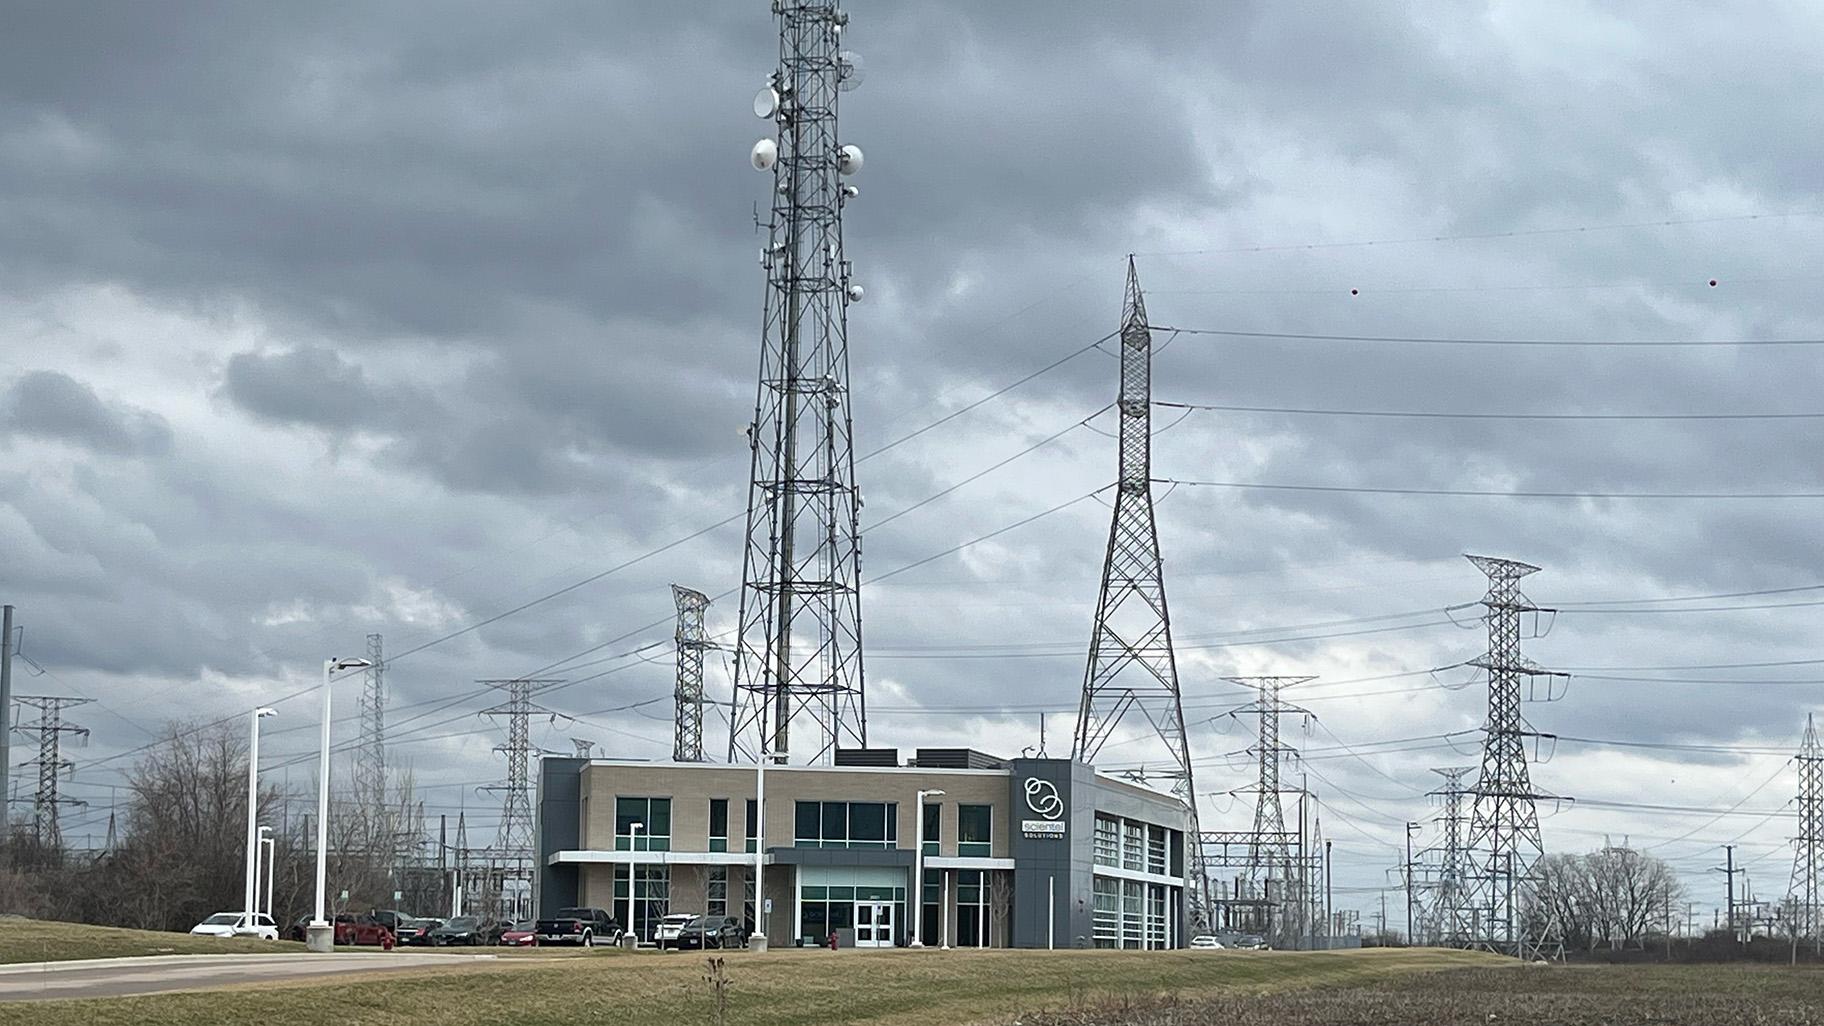 Scientel Solutions, pictured in March 2022, relocated to Aurora after plans for its tower were approved in 2018. (WTTW News)